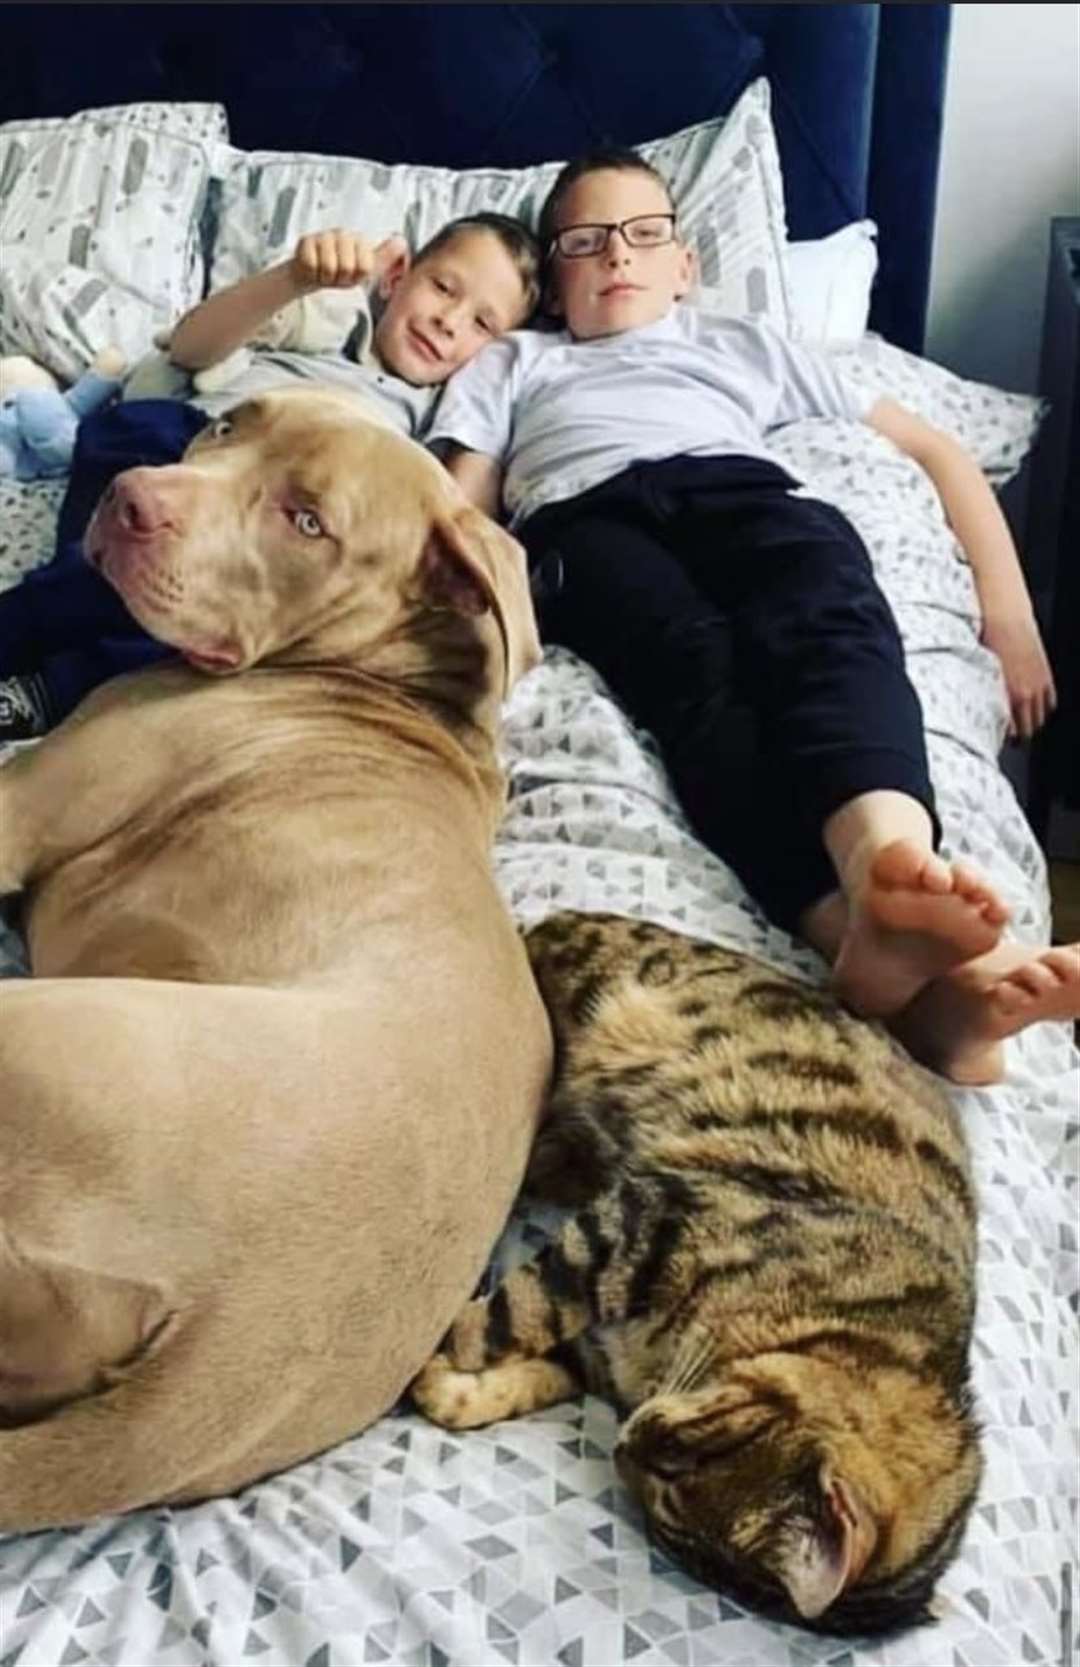 Fraser,eight, his brother Lloyd,10 with their pets dog Caesar and cat Hunter